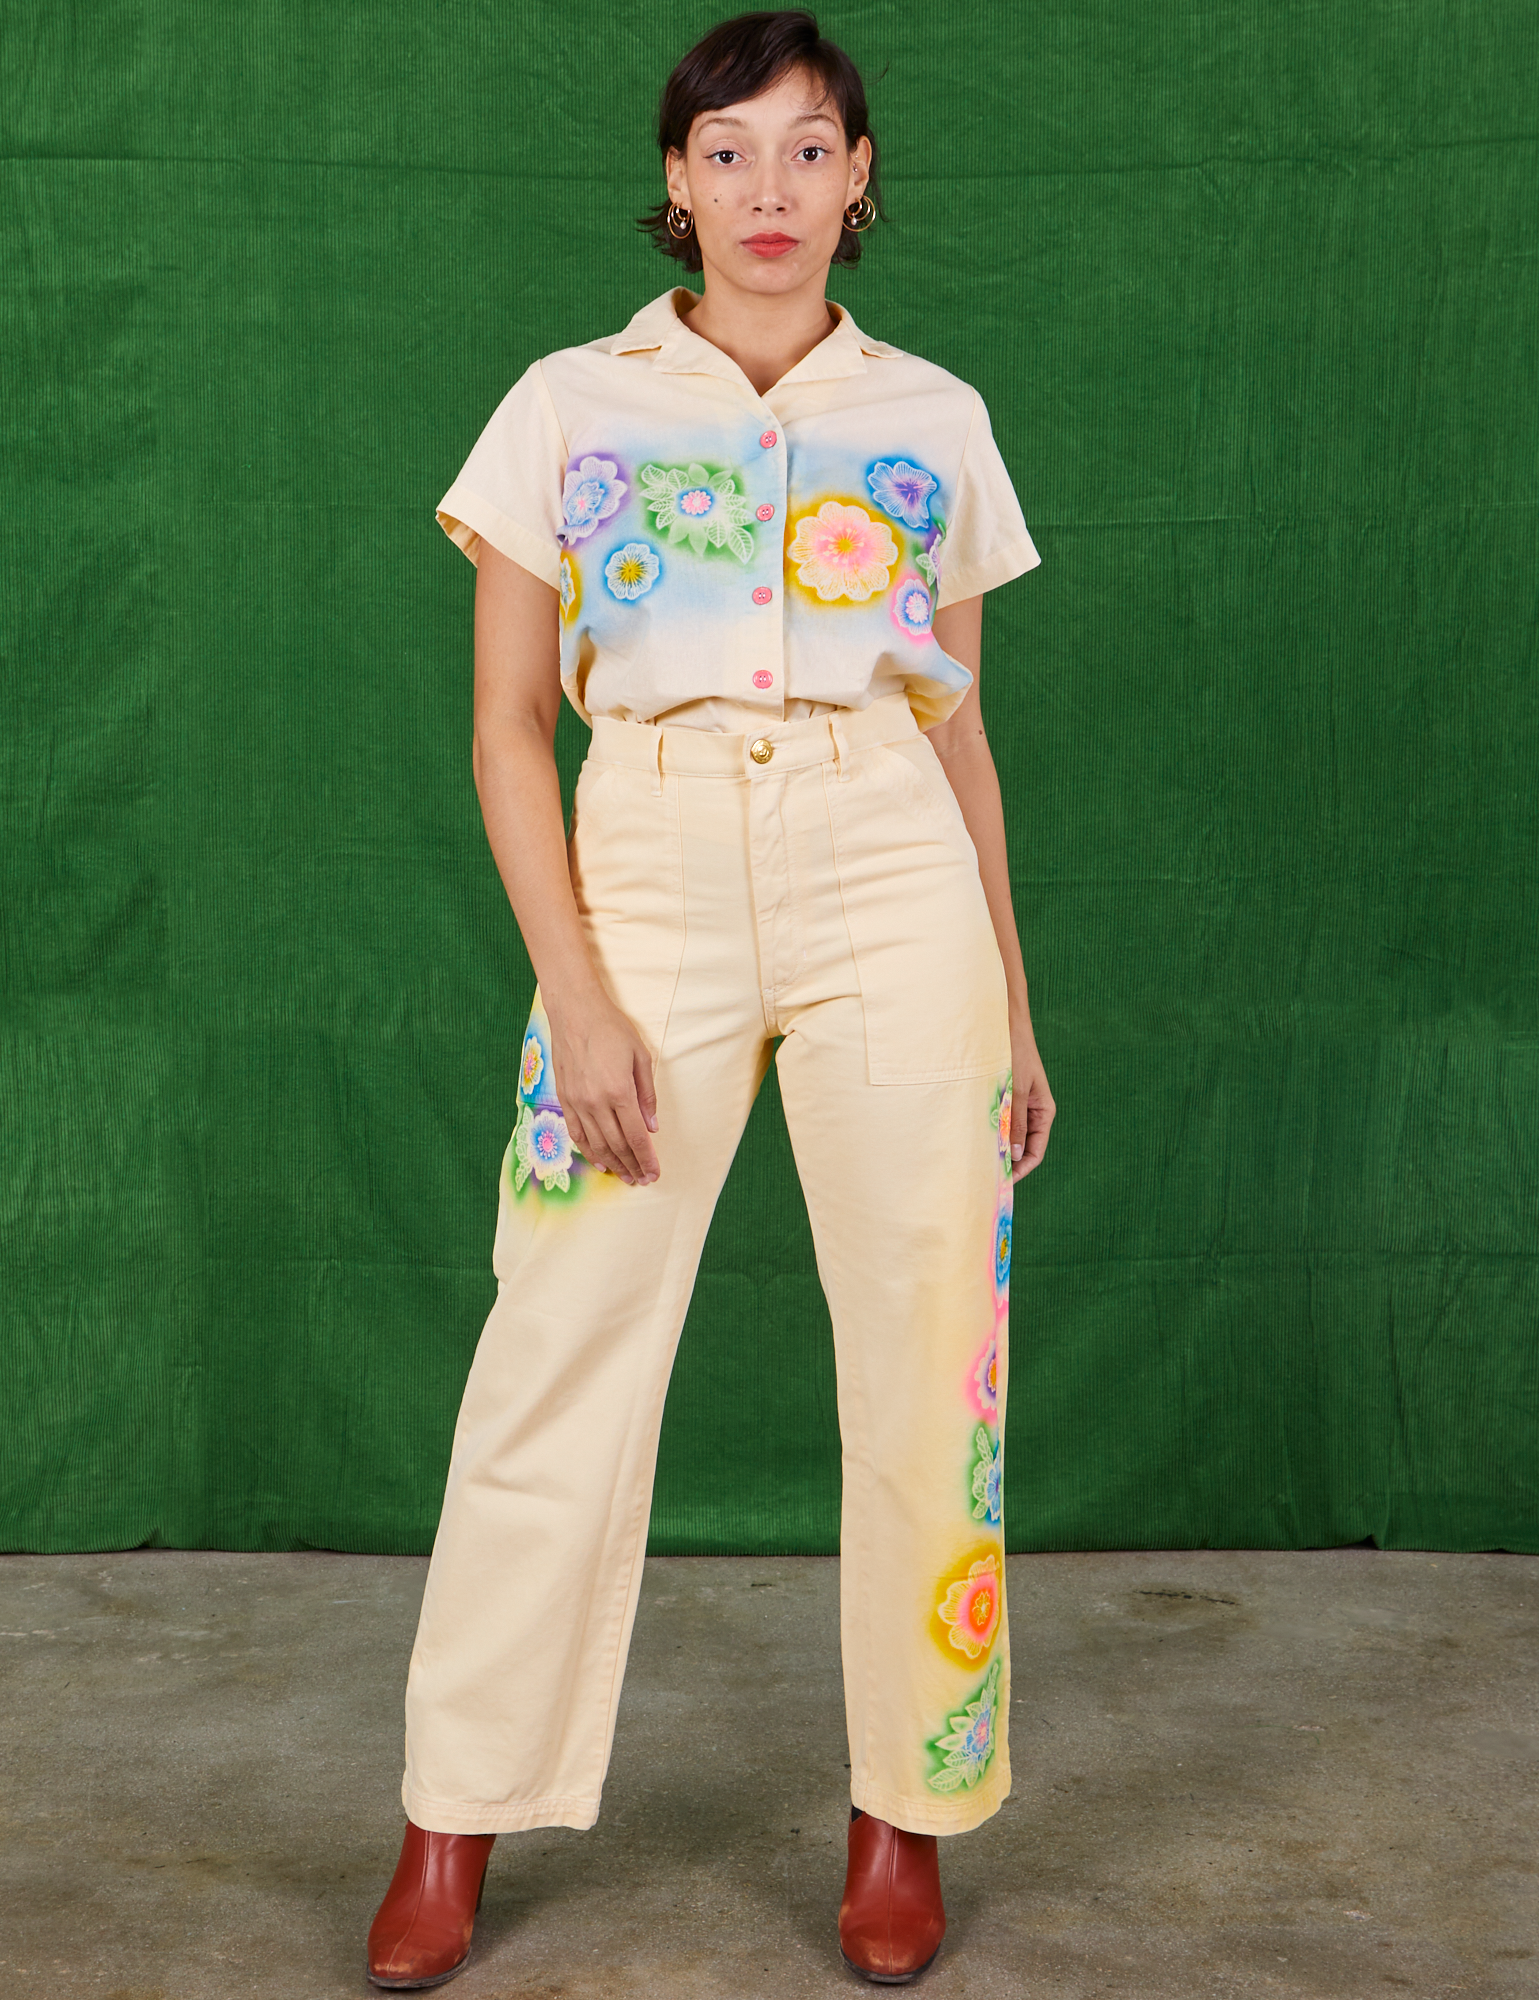 Tiara is wearing Pantry Button-Up in Lace Airbrush and matching Work Pants